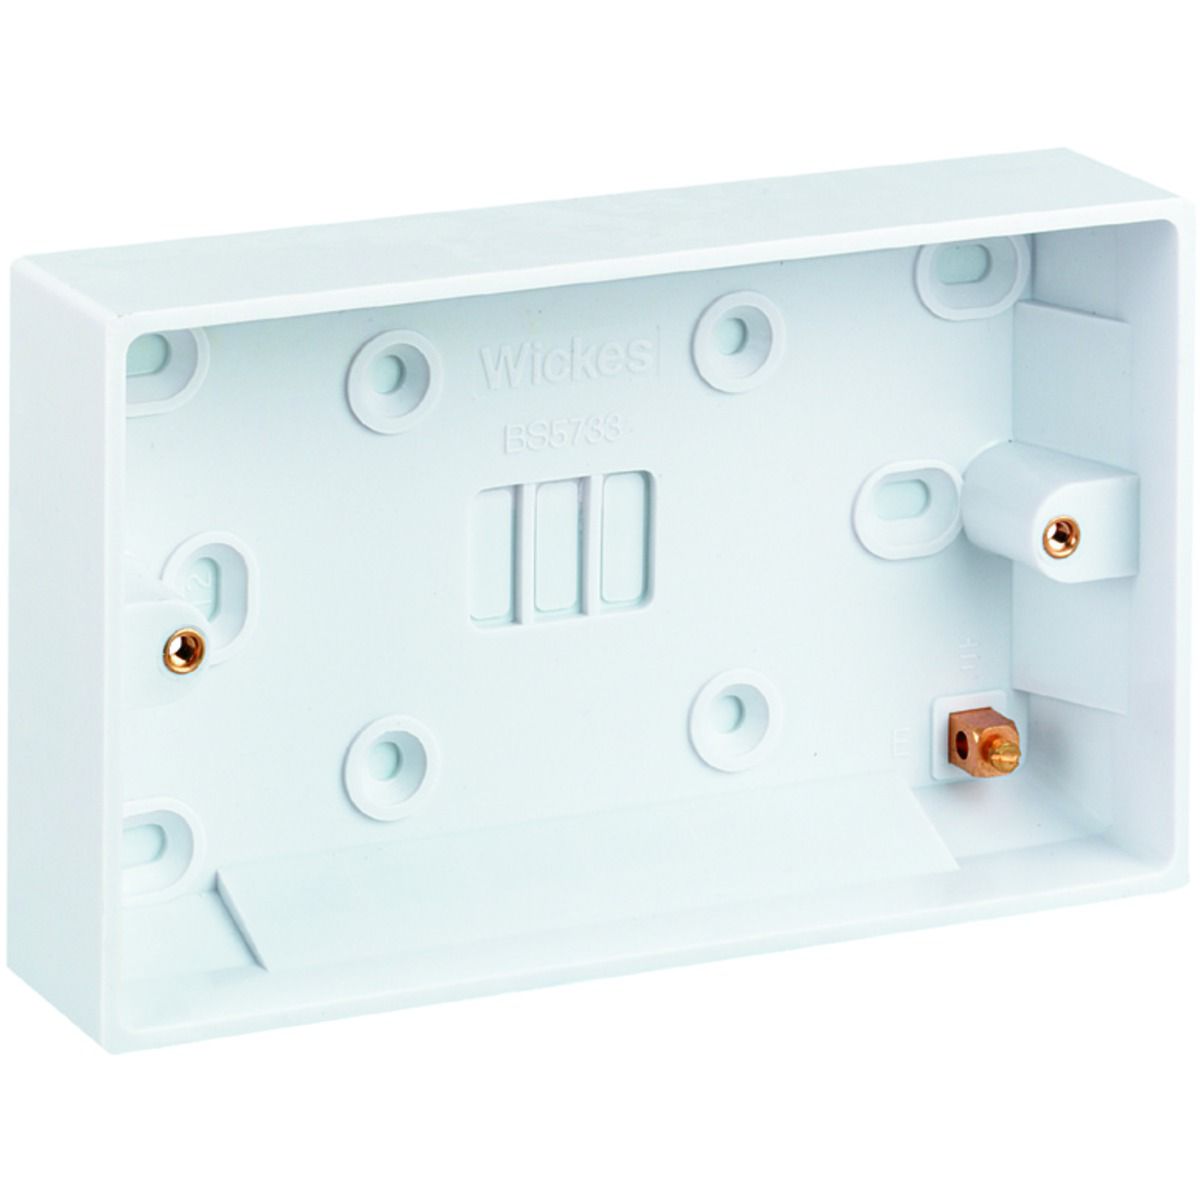 Image of Wickes 2 Gang Pattress Box - White 25mm